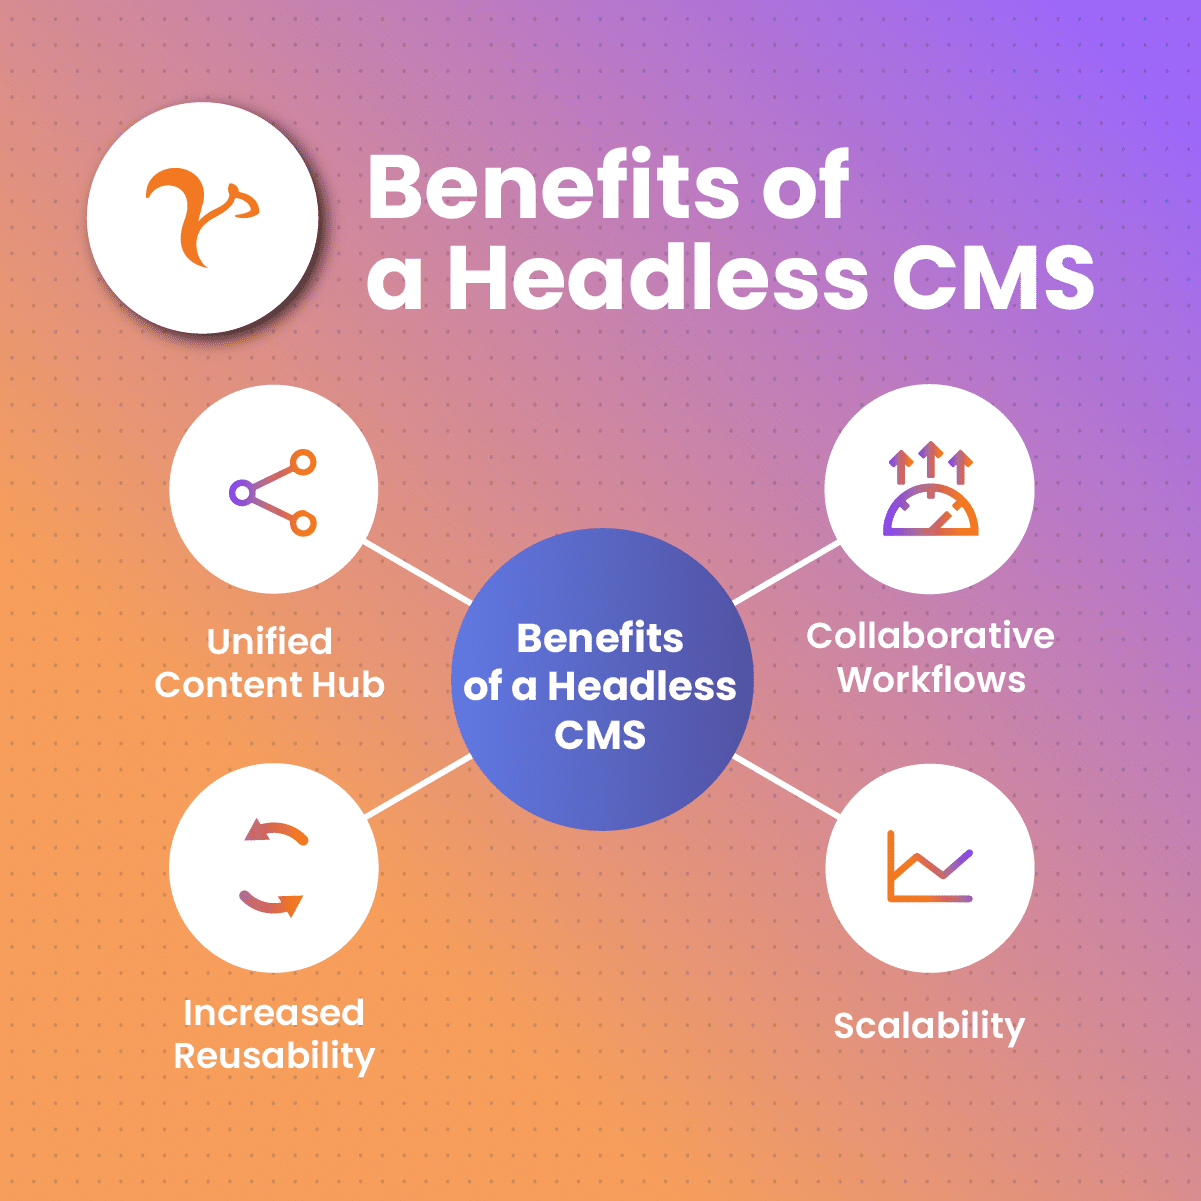 Benefits and Use Cases of Headless CMS